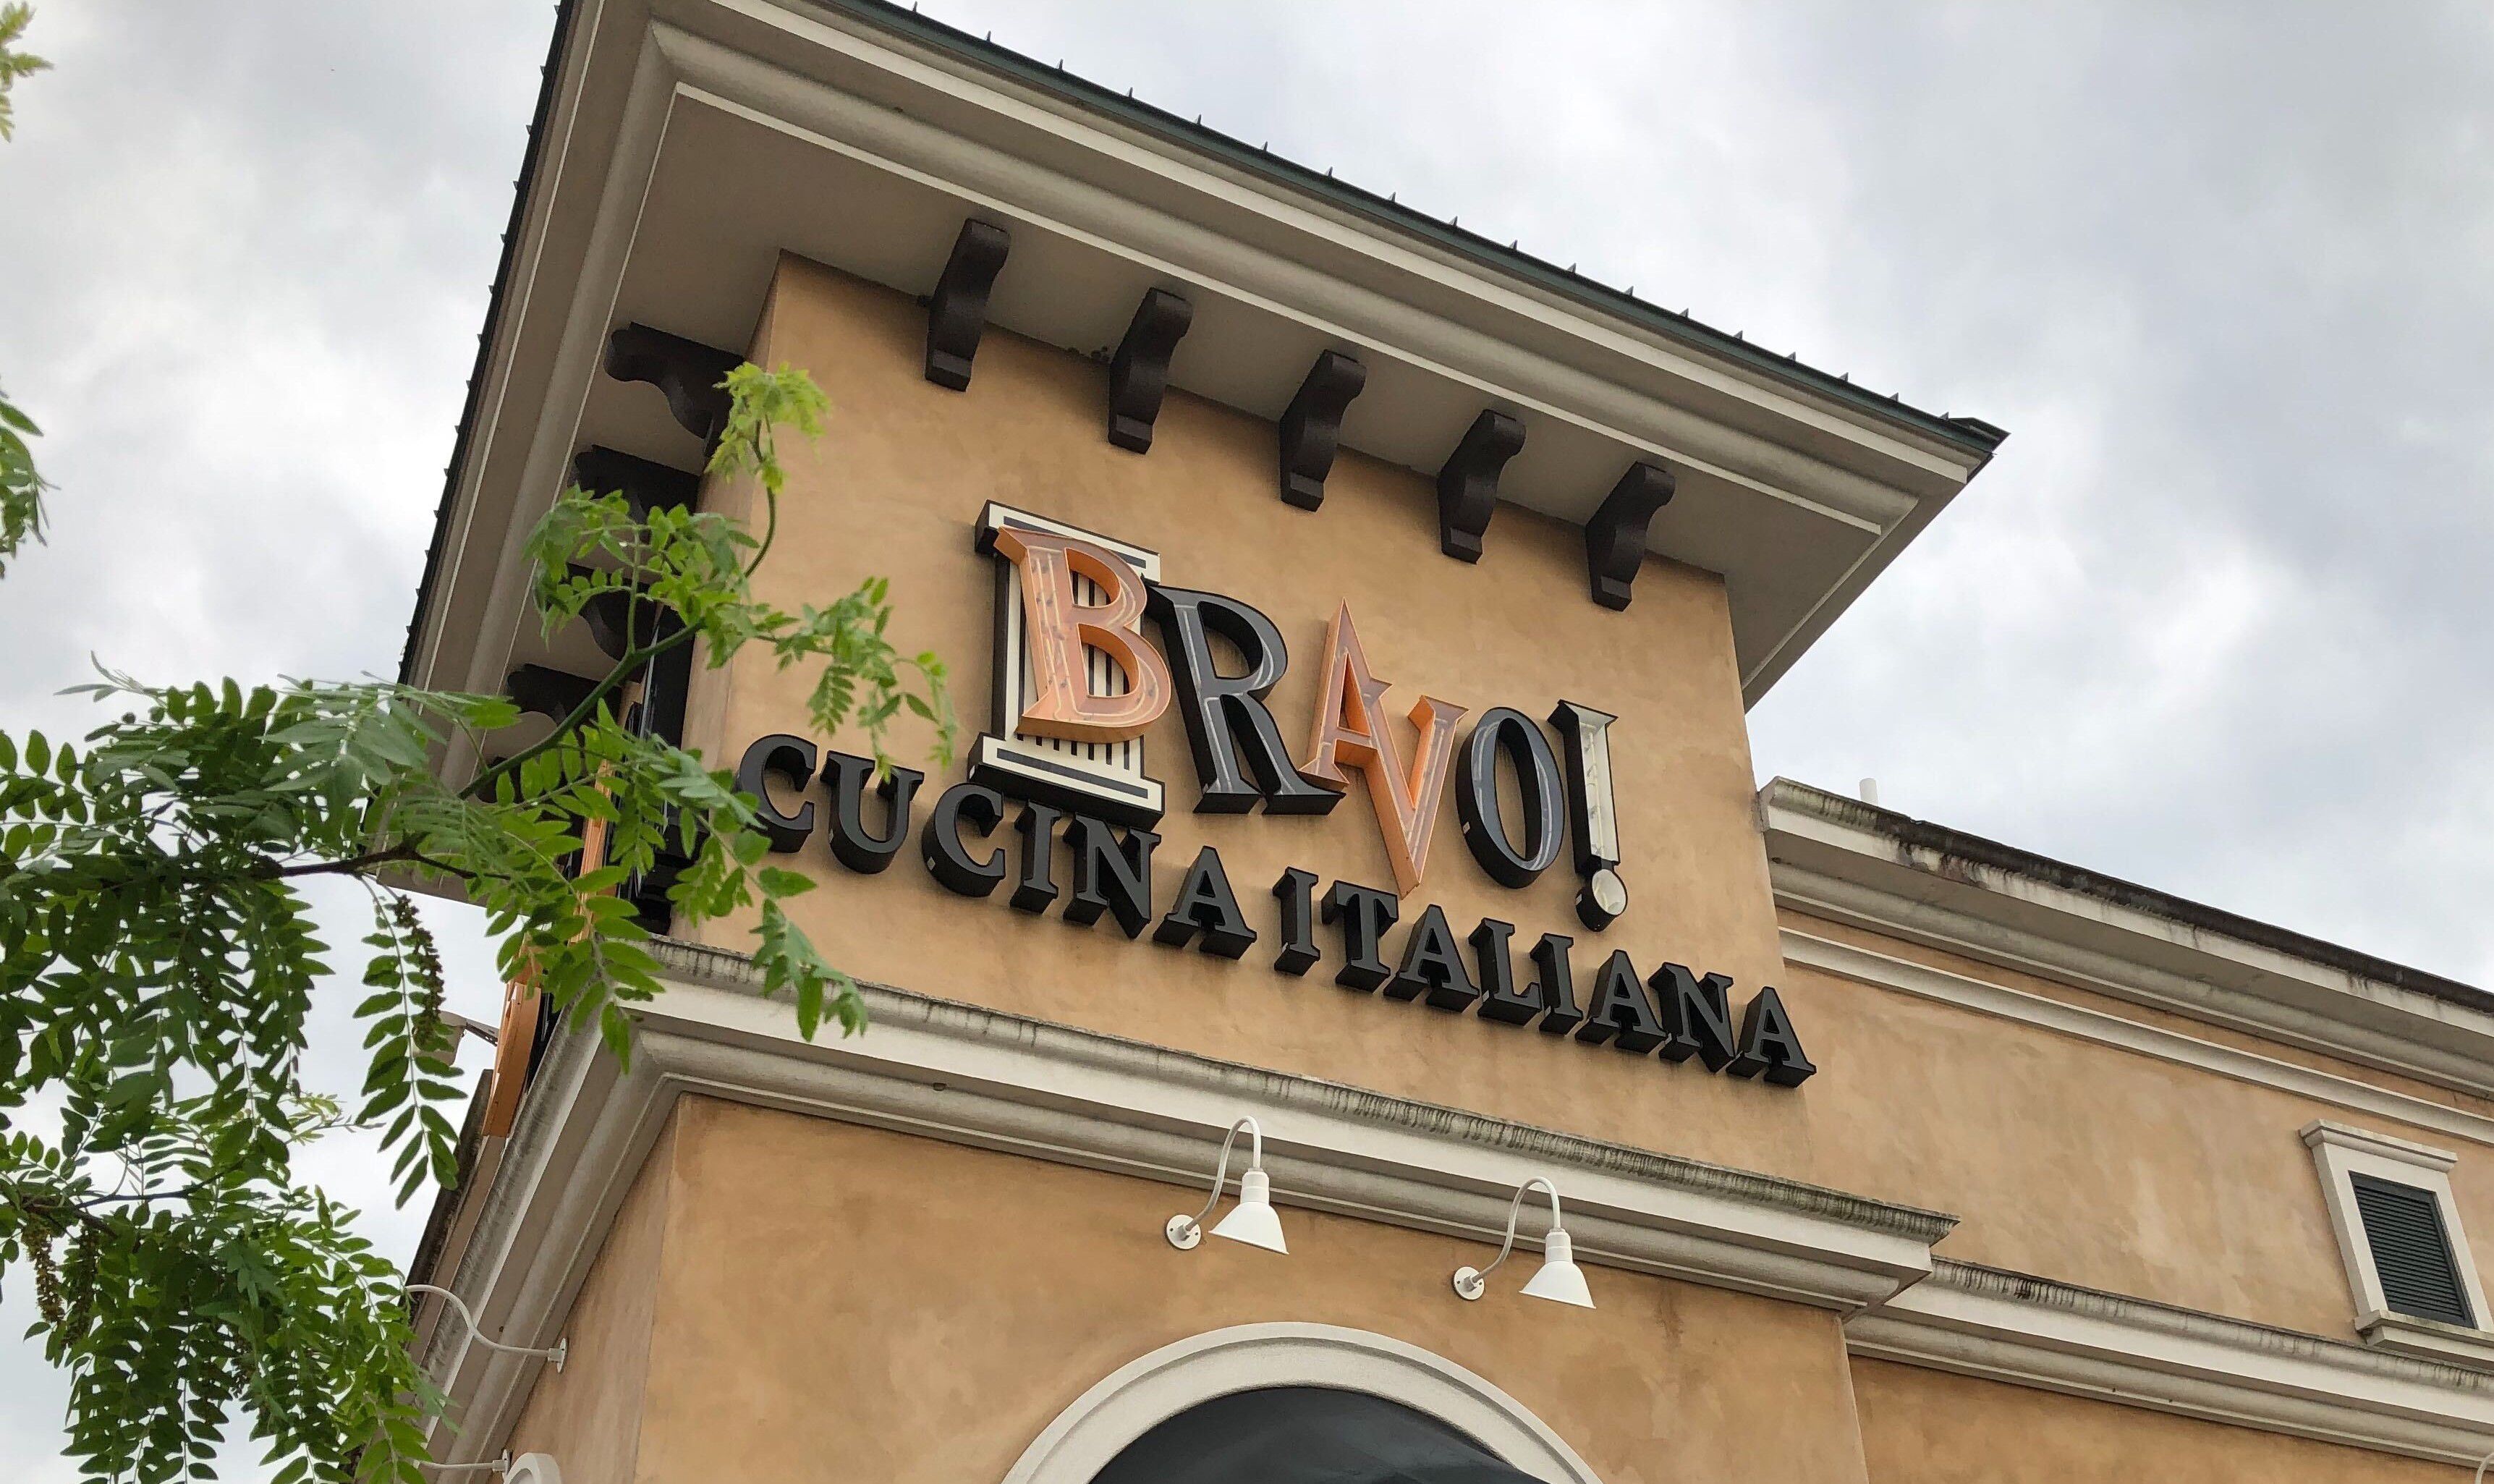 Bravo and Brio restaurants' owners are improvements